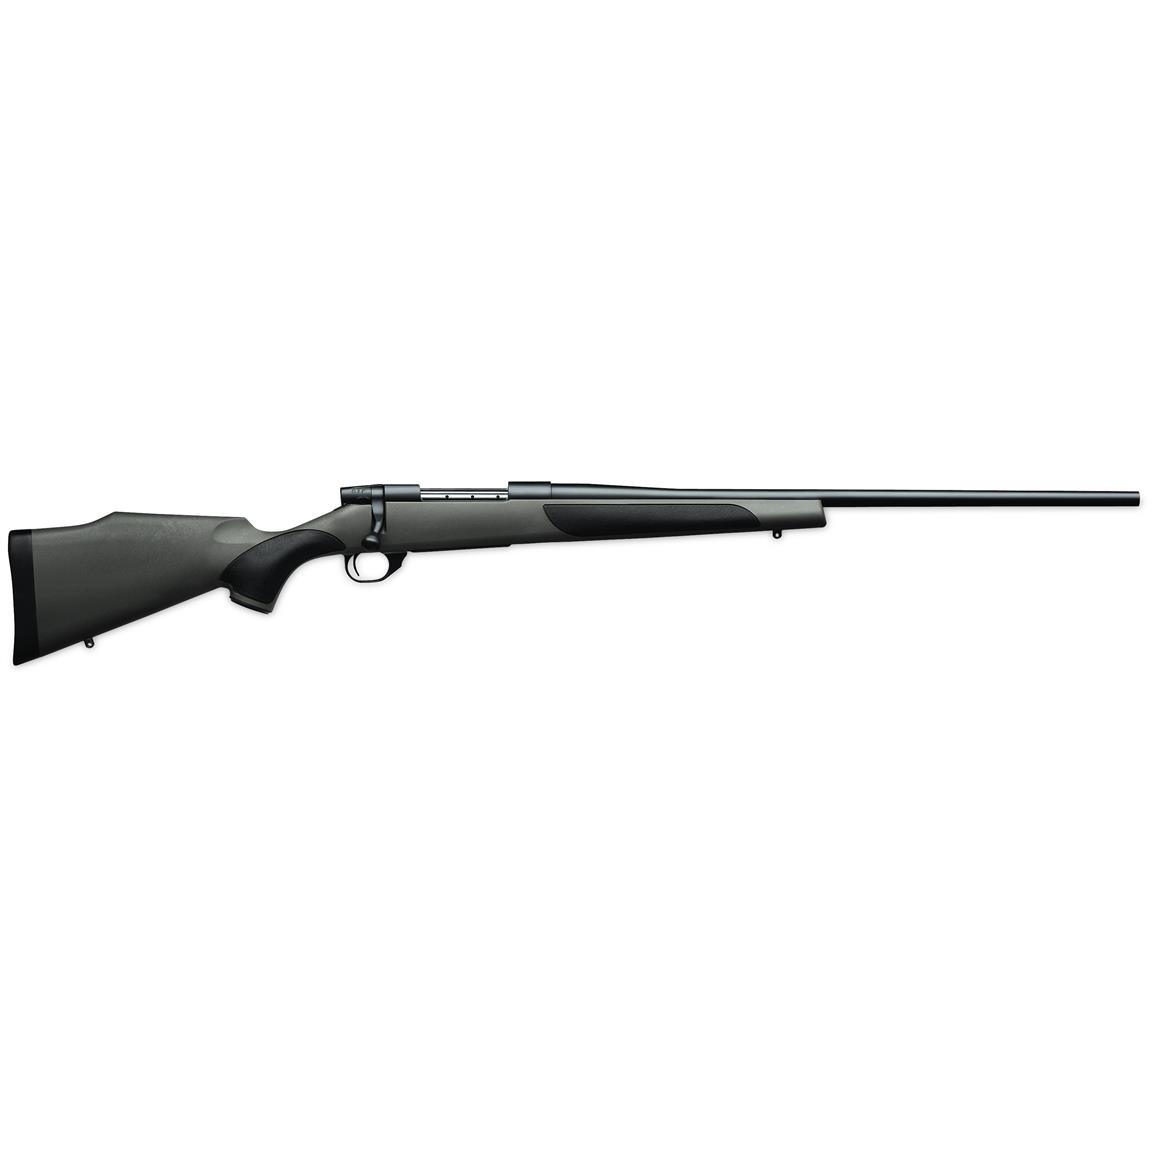 Weatherby Vanguard 2 Synthetic, Bolt Action, .240 Weatherby Magnum, 24" Barrel, 5+1 Rounds